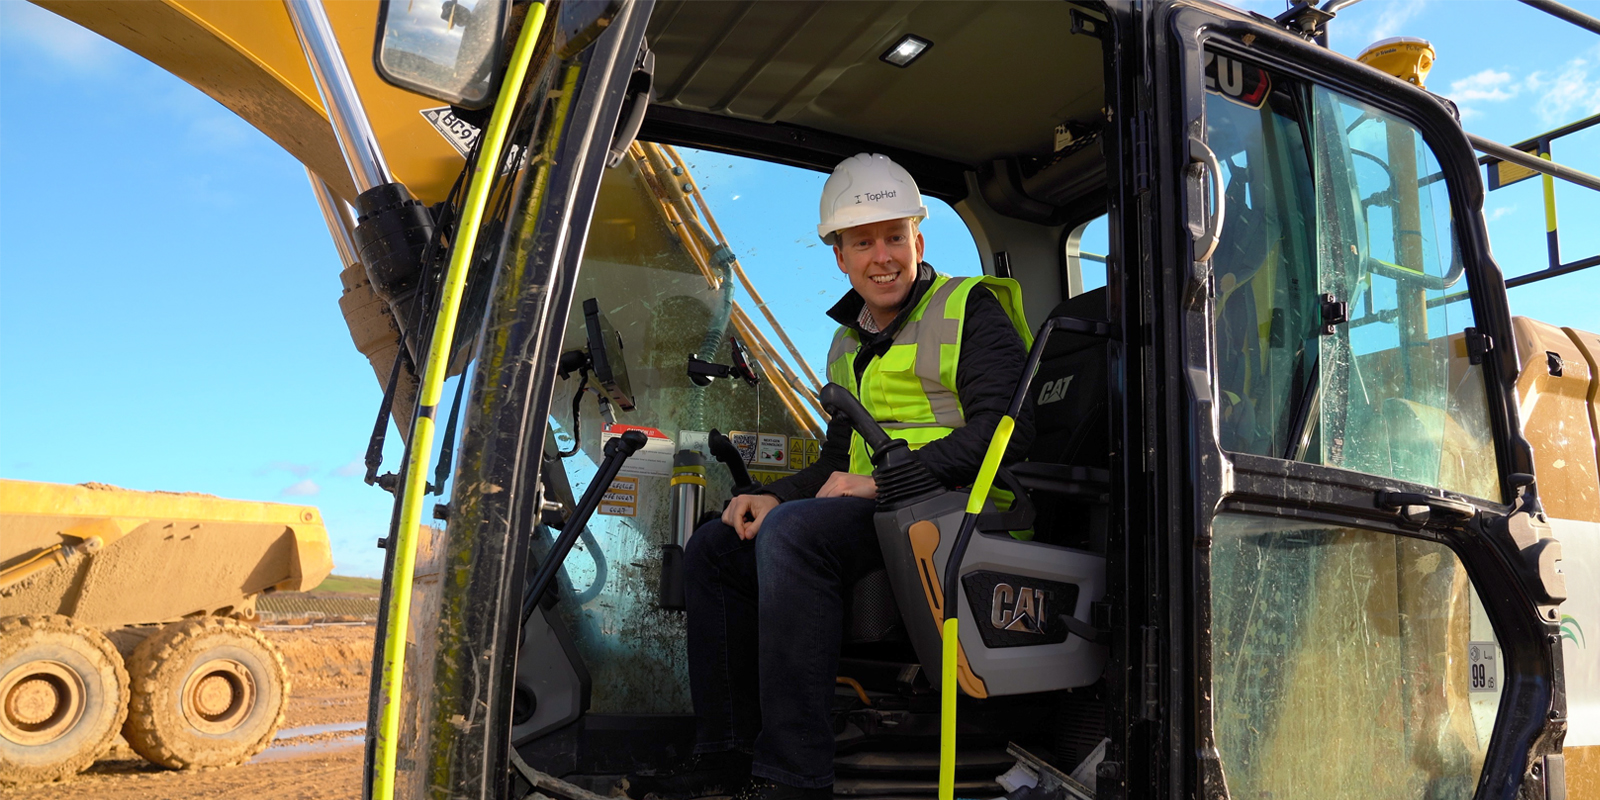 Corby MP Tom sitting in digger